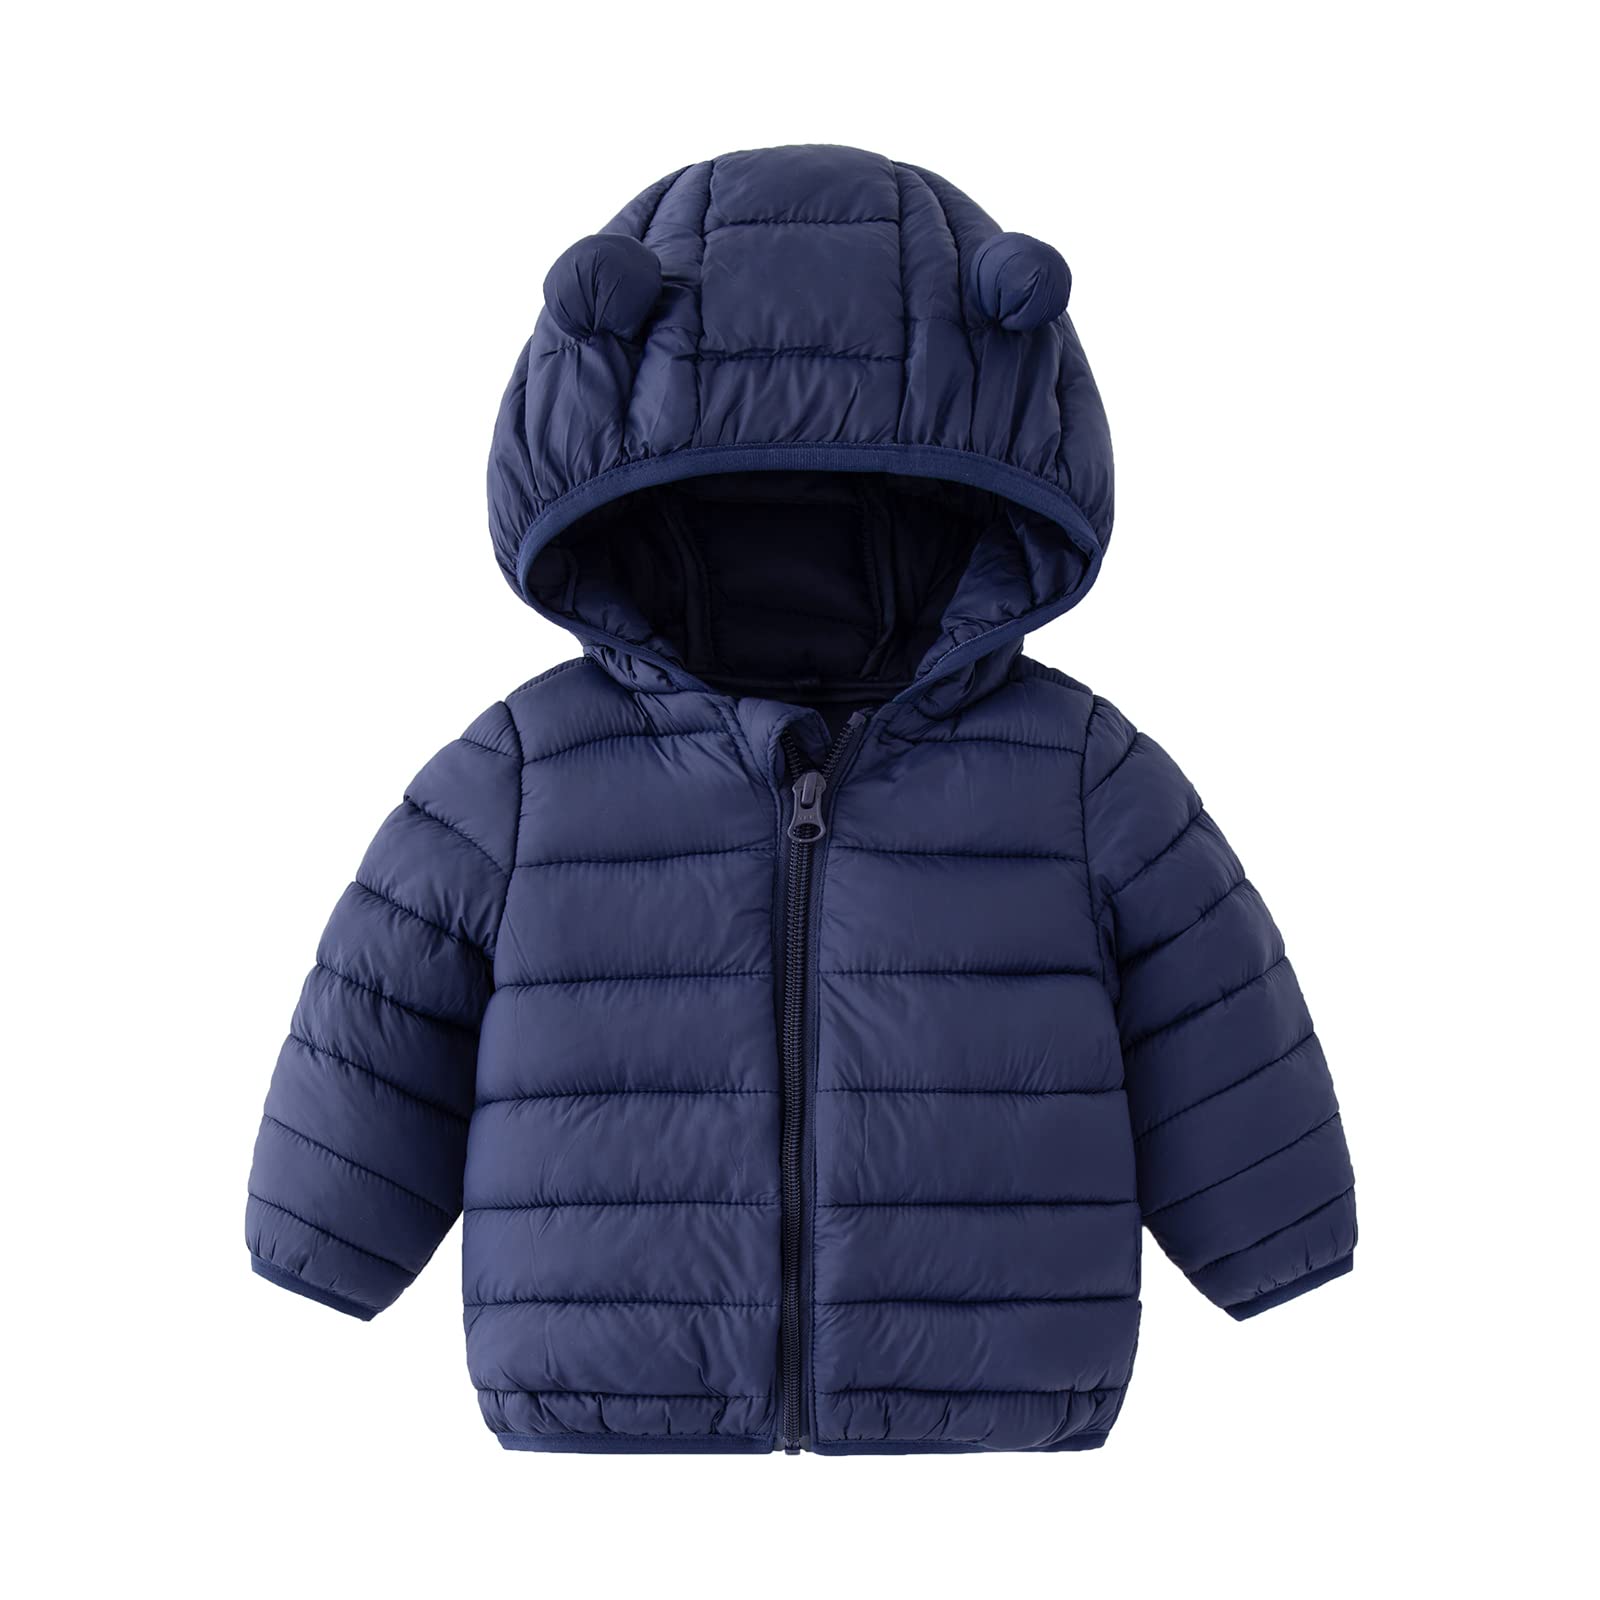 cEcORc Winter coats for Kids with Hoods (Padded) Light Puffer Jacket for Outdoor Warmth, Travel, Snow Play  Little girls, Little